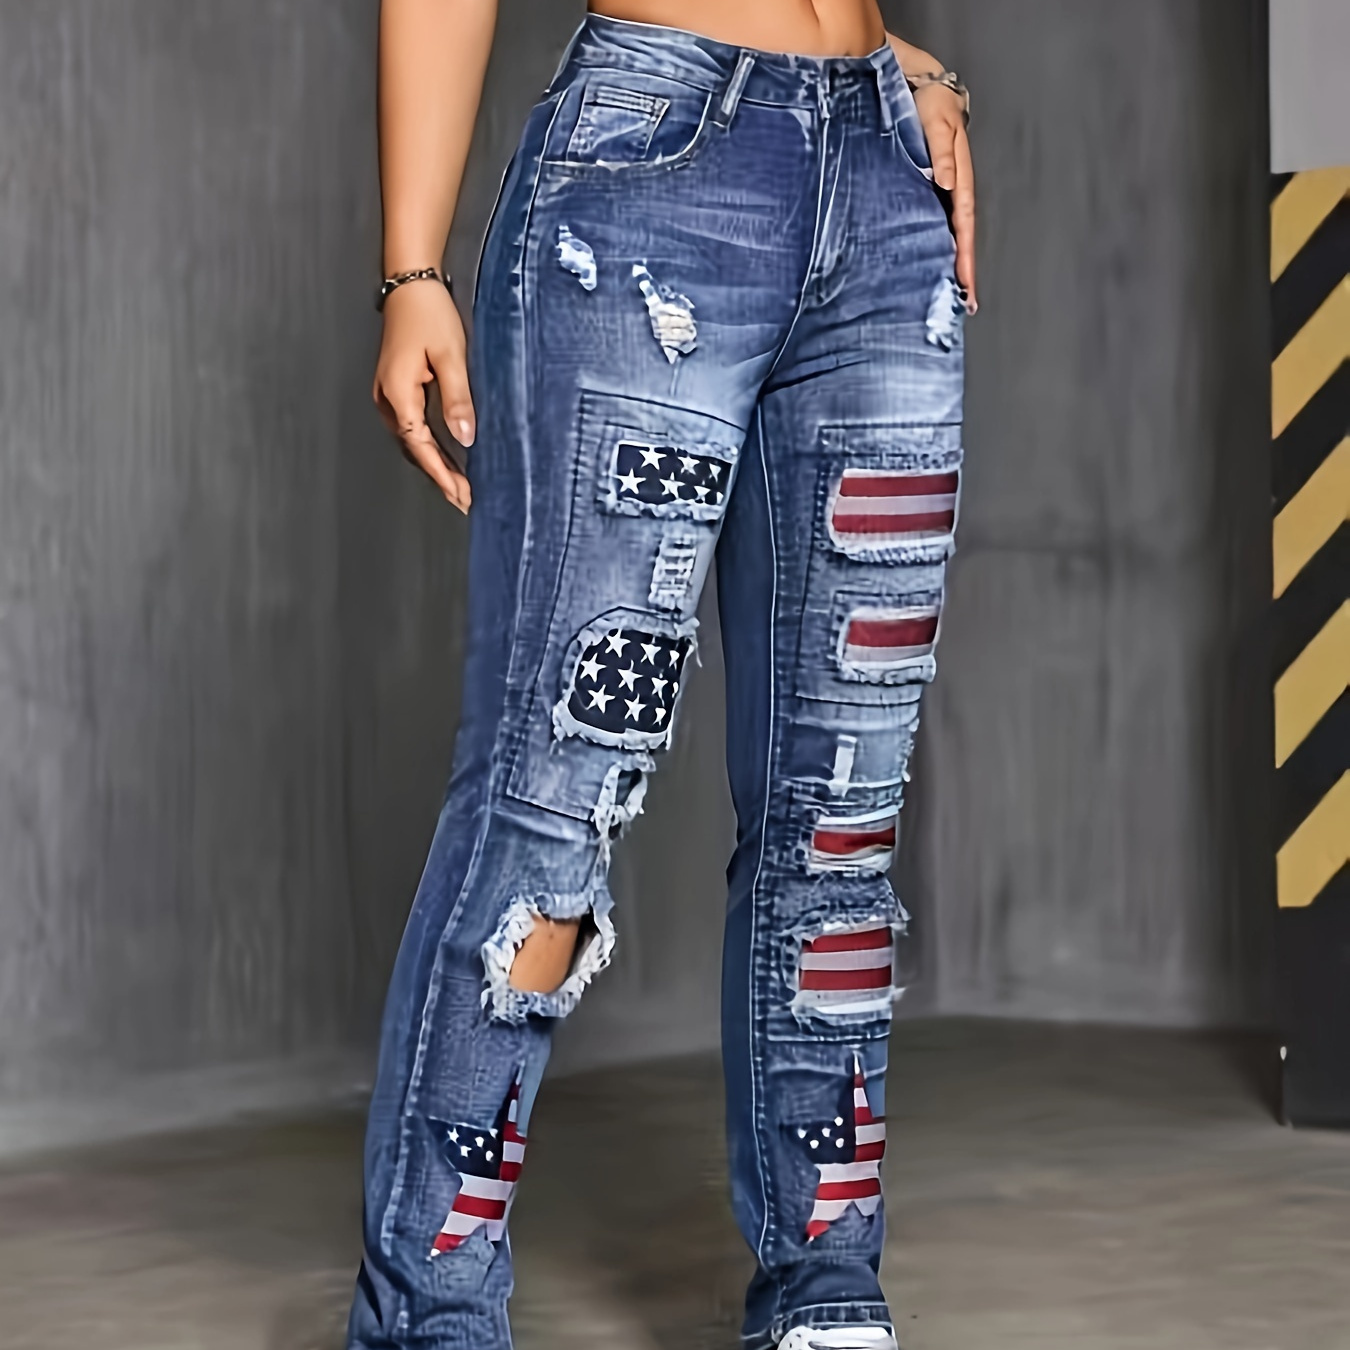 

Women's Distressed Denim Jeans With Elegant Flag Detail, Sexy Ripped Pants, American Independence Day 4th Of July Fashion Clothing For Fall